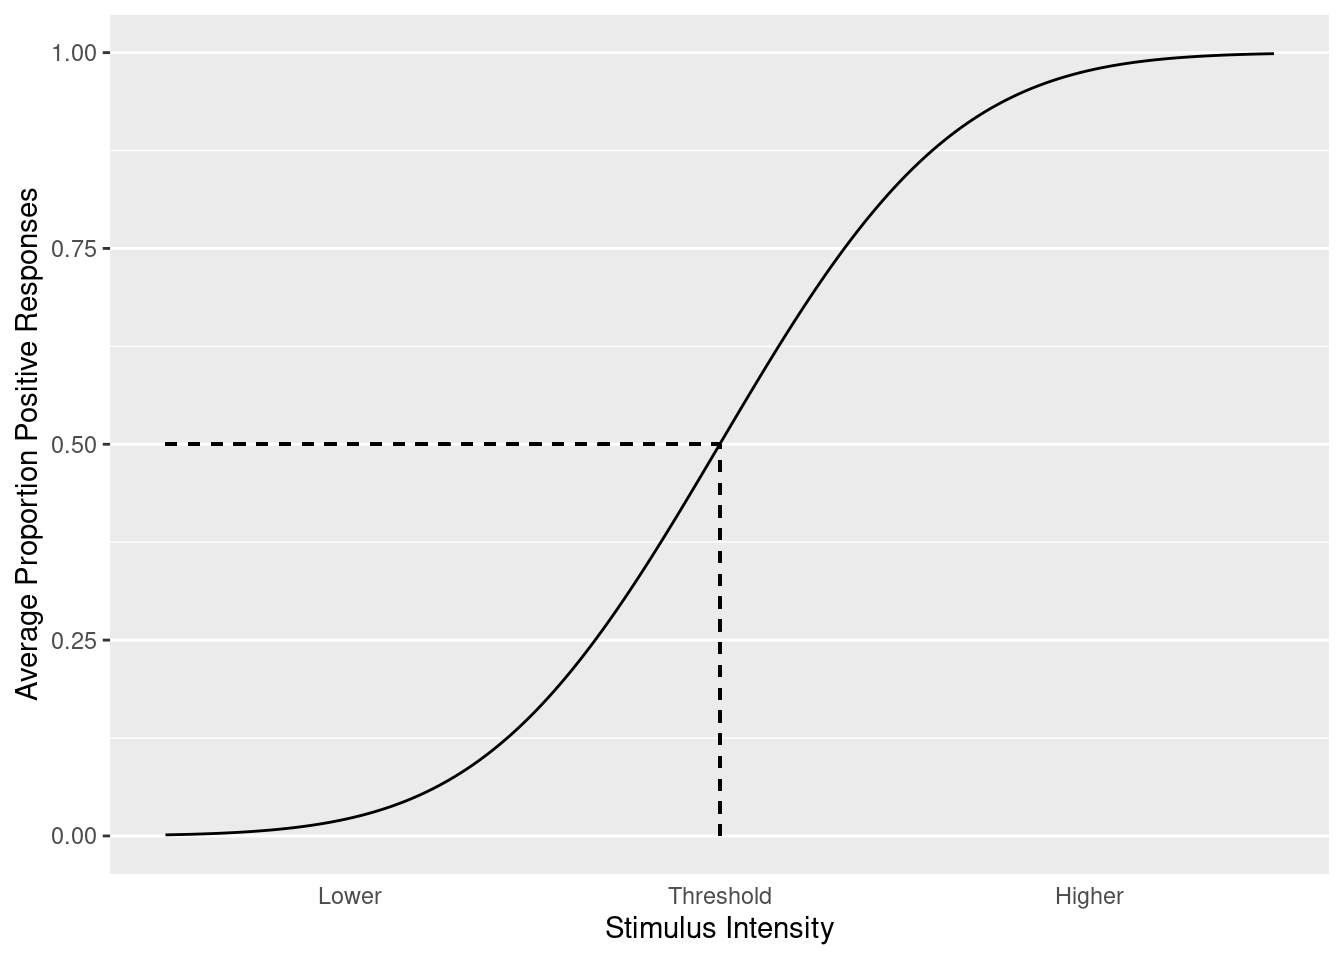 A psychometric curve with threshold intensity. Psychometric curves relate the intensity of stimulation to the perception of stimulation, or the proportion positive responses. There are many parameterizations of these functions, but they are typically sigmoidal. The intensity at which, on average, half of responses are positive is often of interest. This intensity is called the threshold.